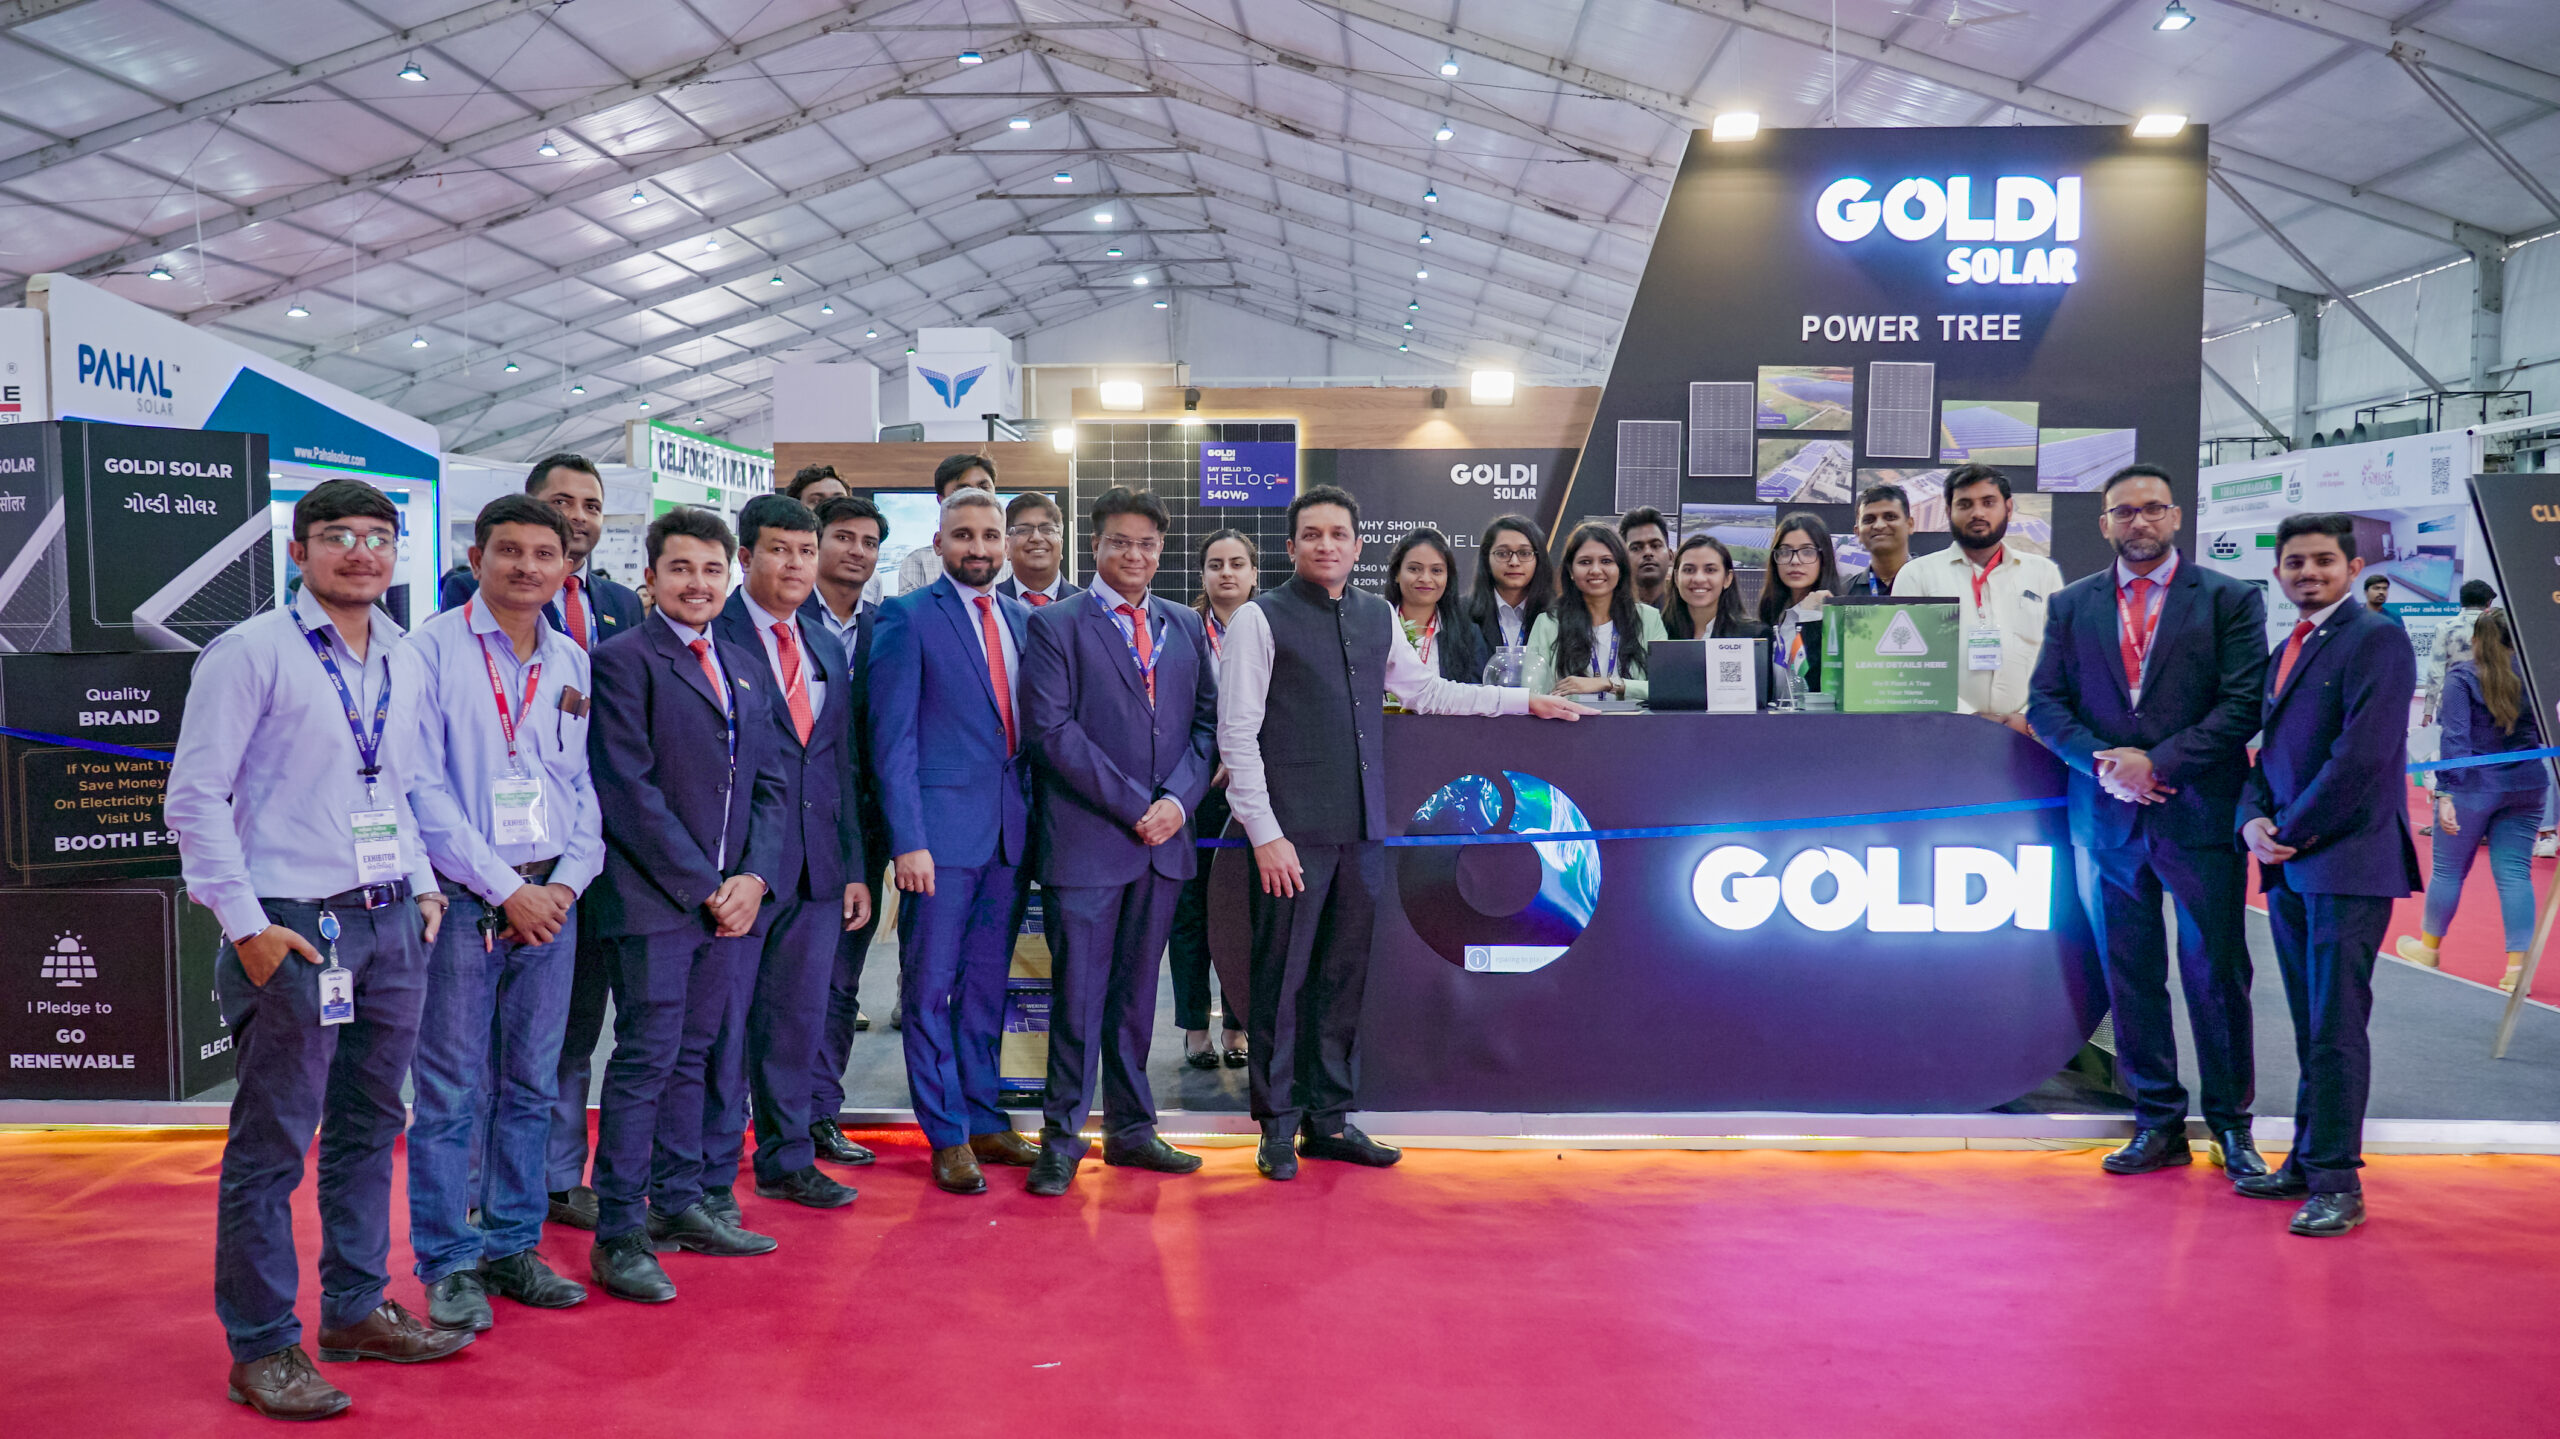 Goldi Solar to train and hire 2000 by 2025